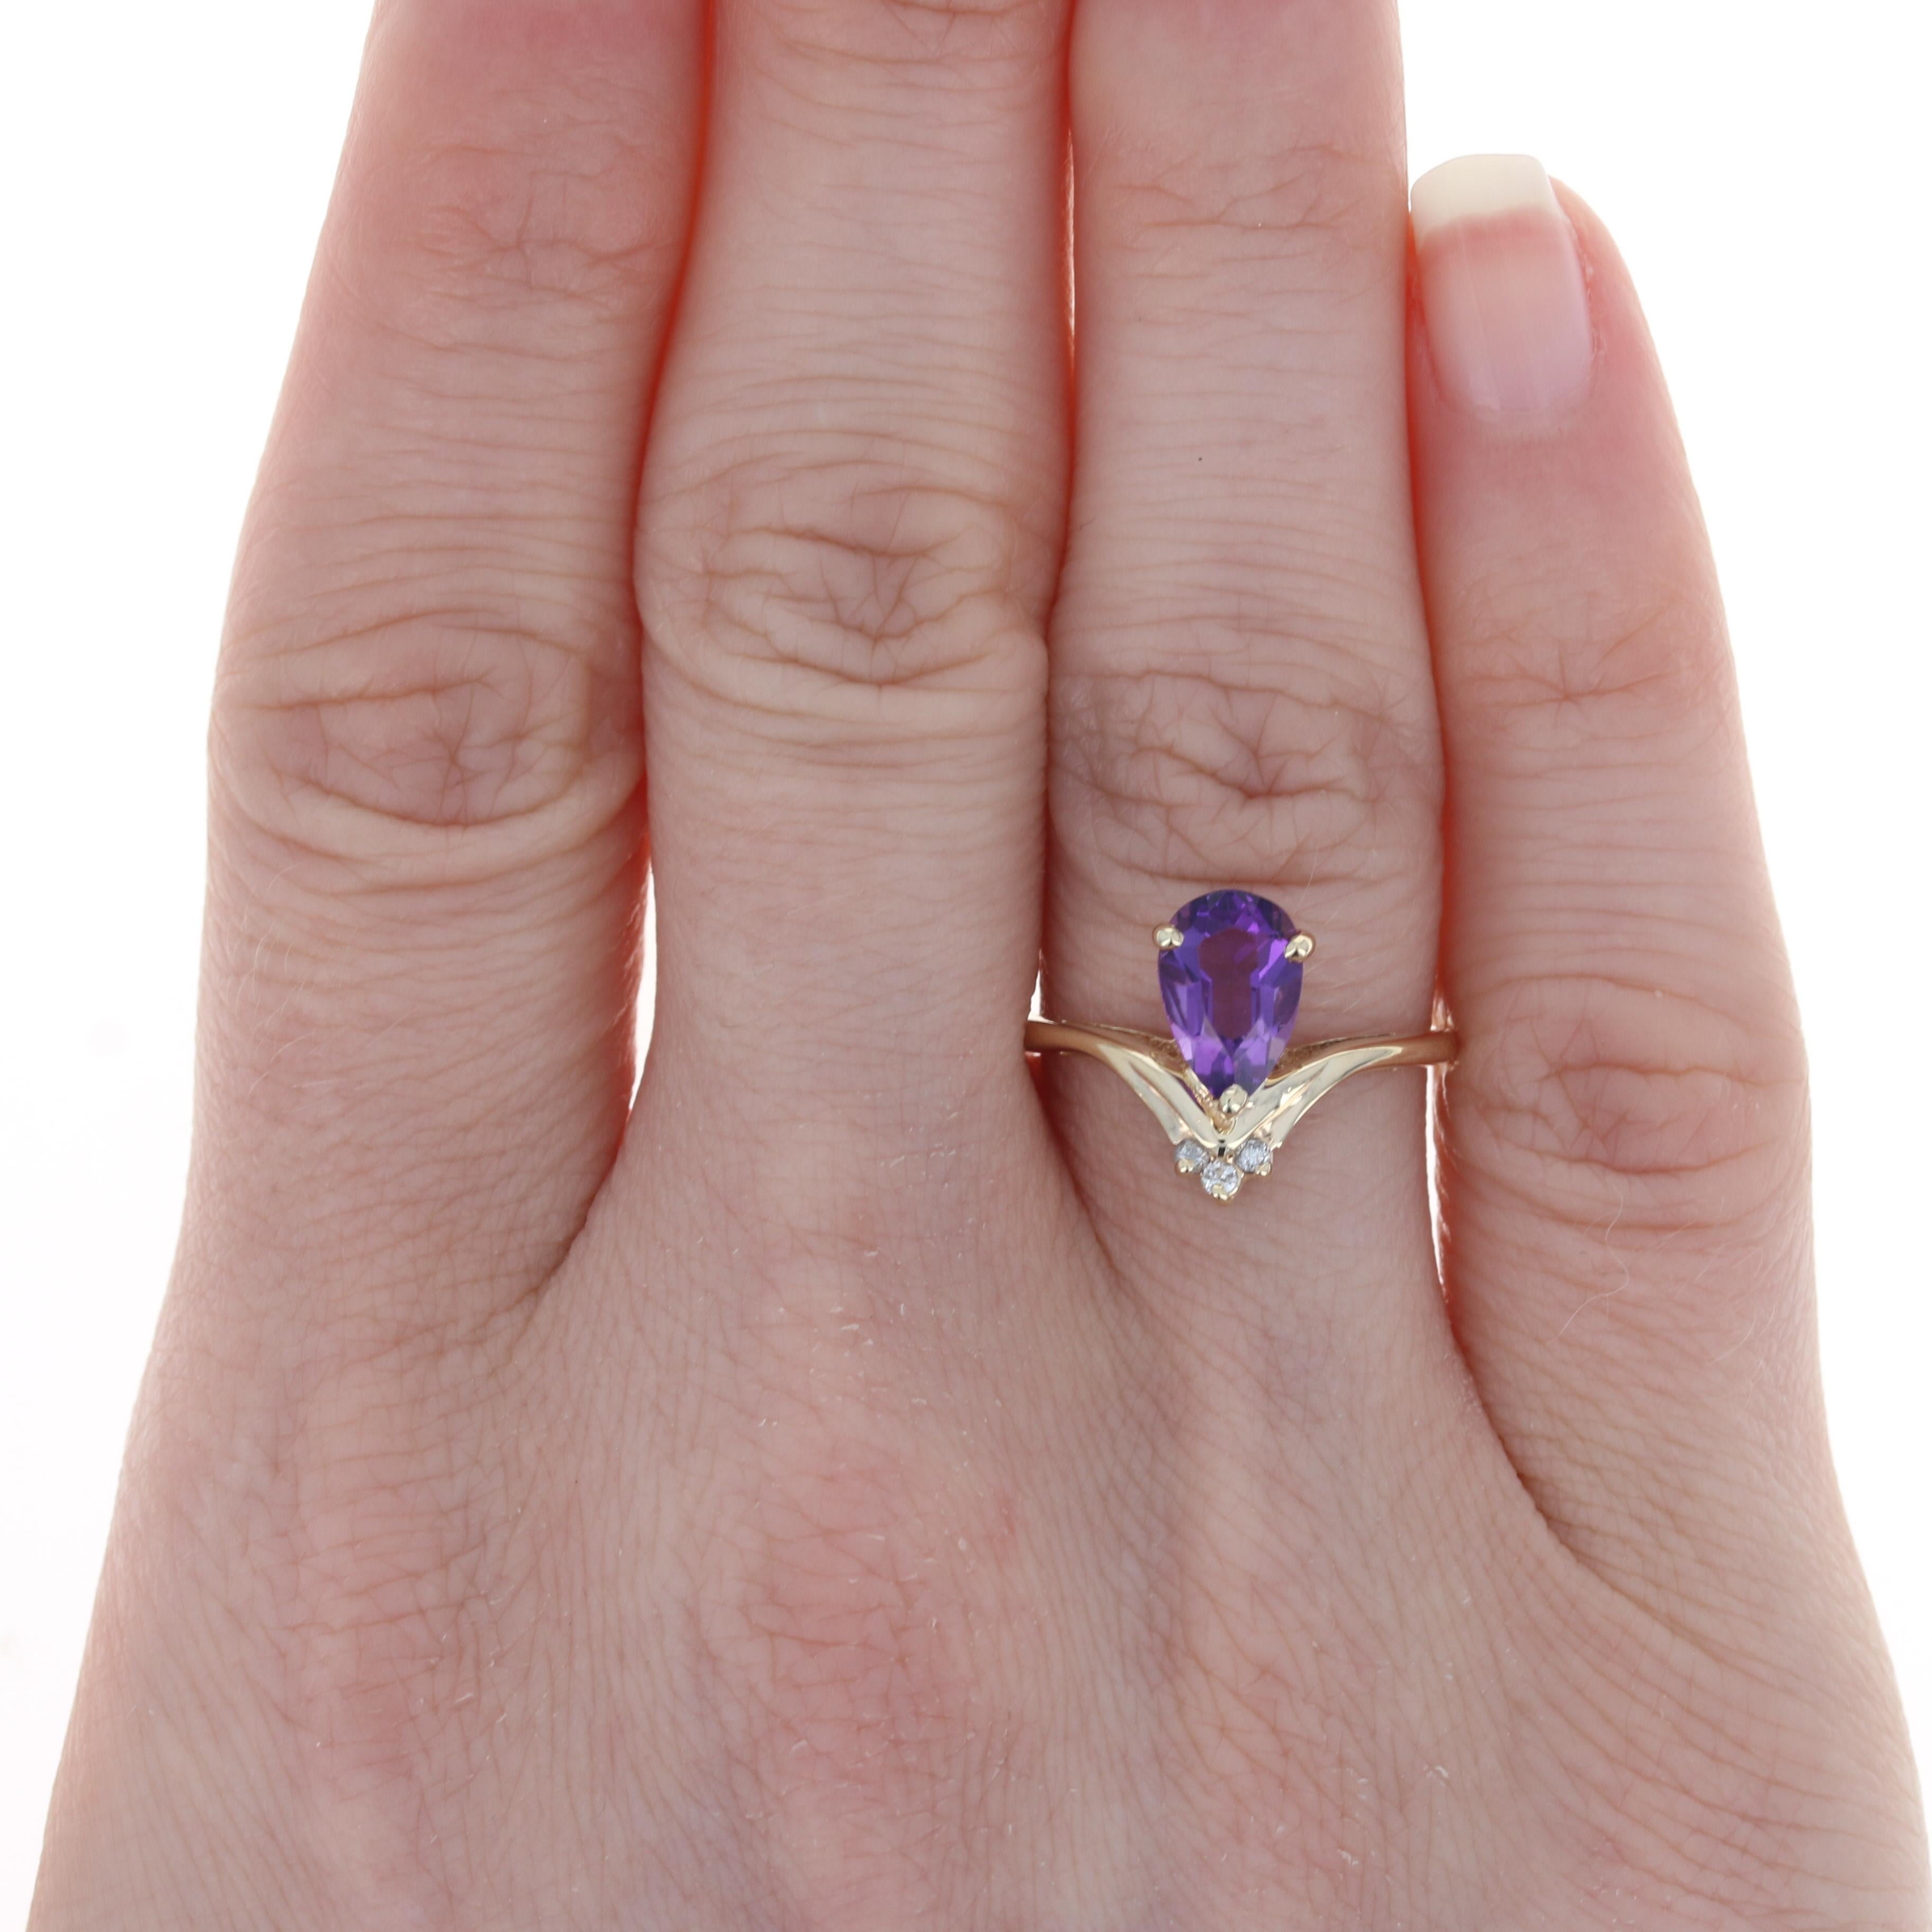 Size: 6 1/2
 Sizing Fee: Down 2 sizes for $20 or Up 2 sizes for $25
 
 Metal Content: 10k Yellow Gold
 
 Stone Information: 
 Genuine Amethyst
 Carat(s): .85ct
 Cut: Pear
 Color: Purple
 
 Natural Diamonds 
 Carat(s): .03ctw
 Cut: Round Brilliant
